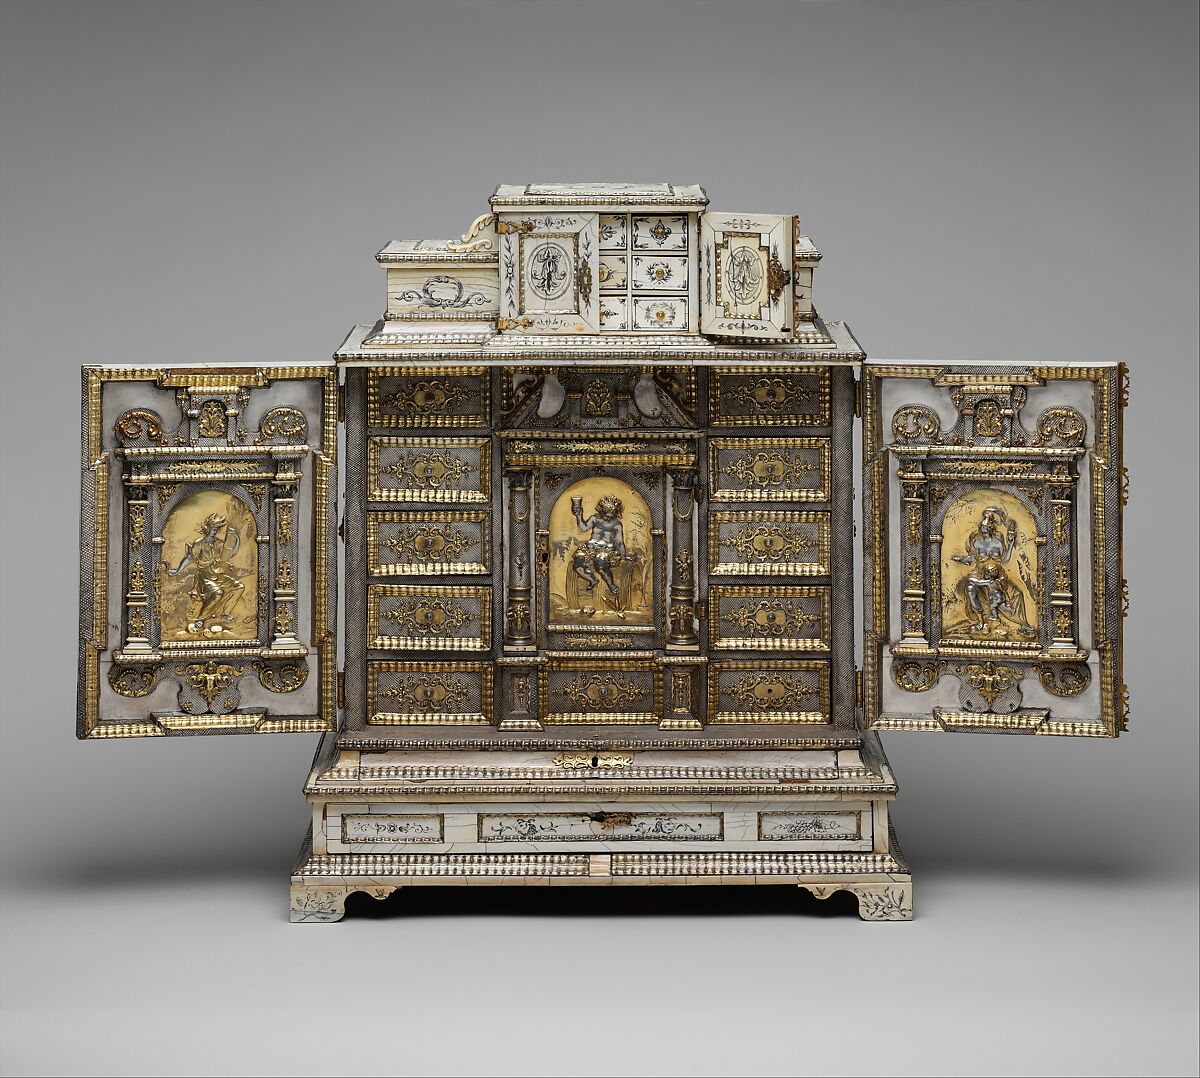 Cabinet, Cabinetry by the workshop of Melchior Baumgartner (German) (1621–1686), Oak, pine, walnut, cedar, ebony, and rosewood; ivory veneer and silver veneer; silver; silver-gilt moldings; gilded yellow-metal mounts; the drawers lined with aquamarine-colored silk, German, Augsburg 